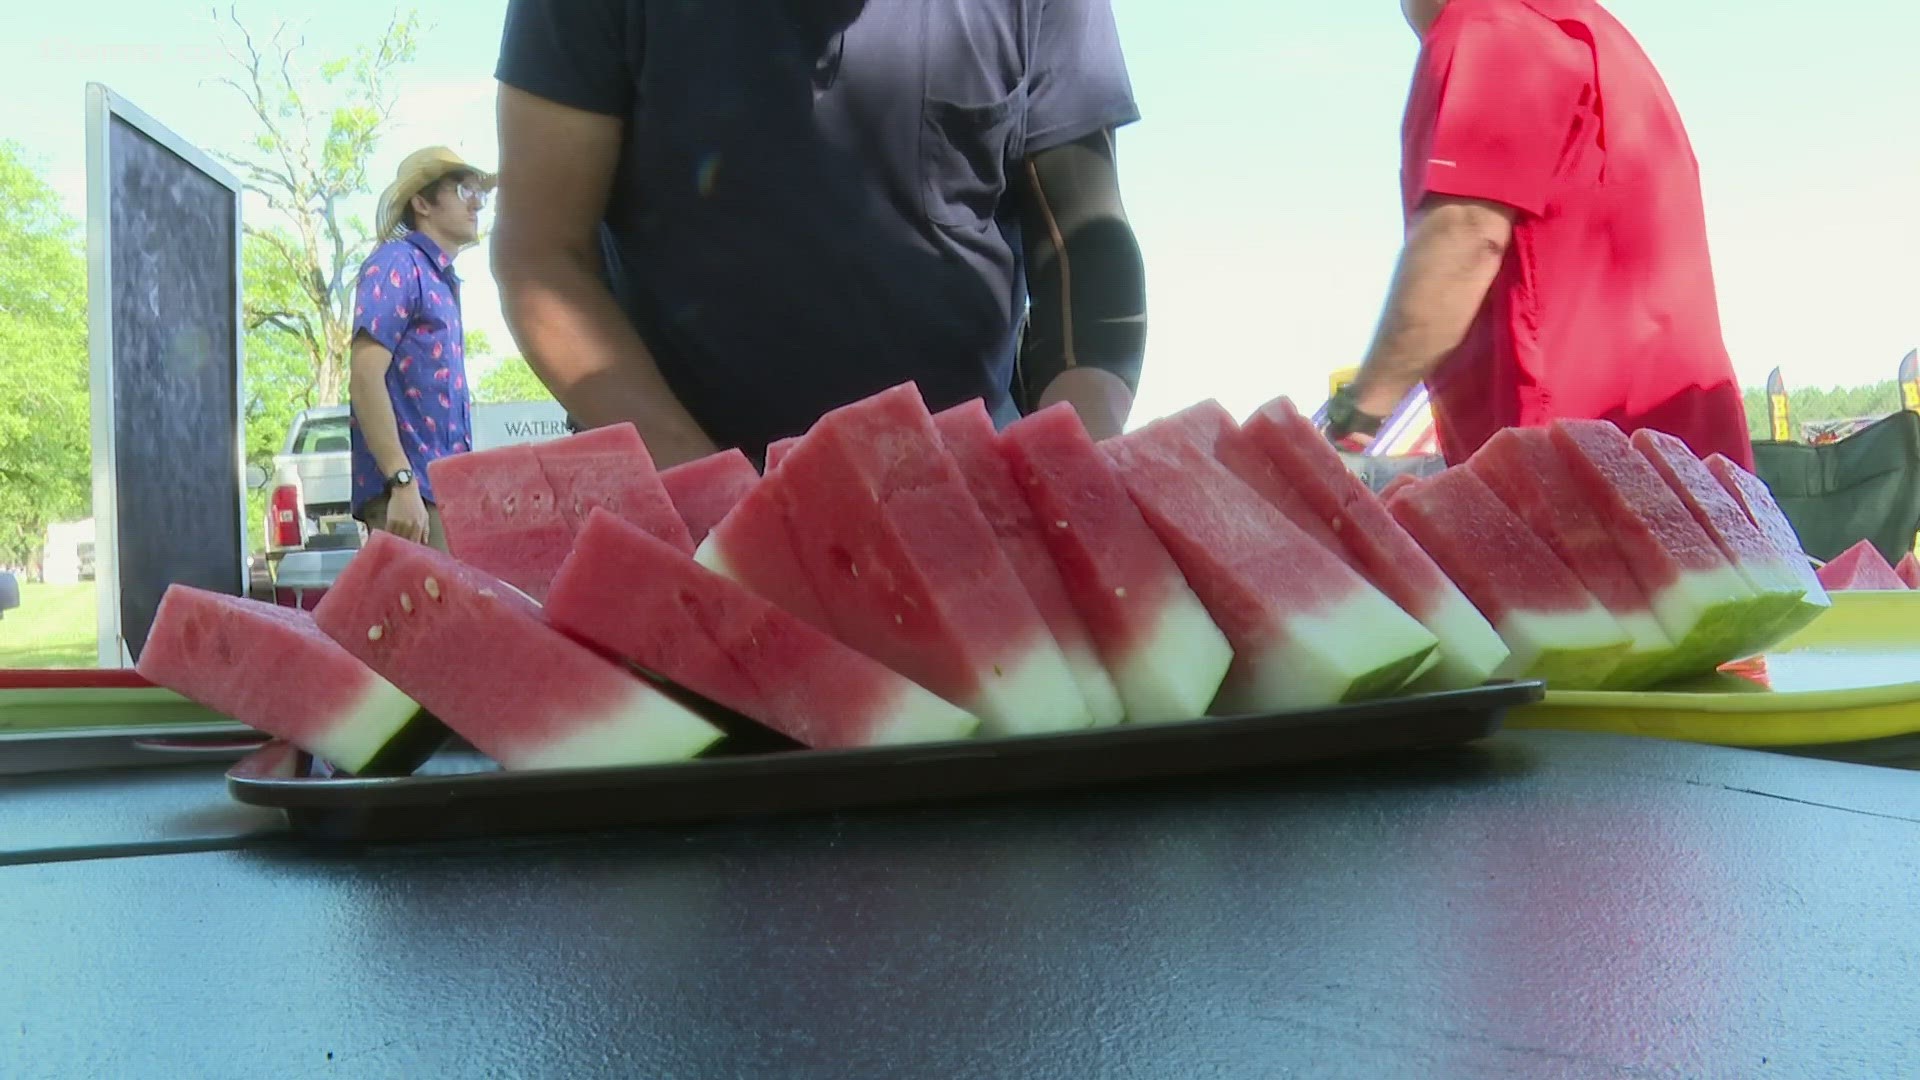 There were several places to fill up on freshly cut watermelon, as well as vendors selling arts and crafts.